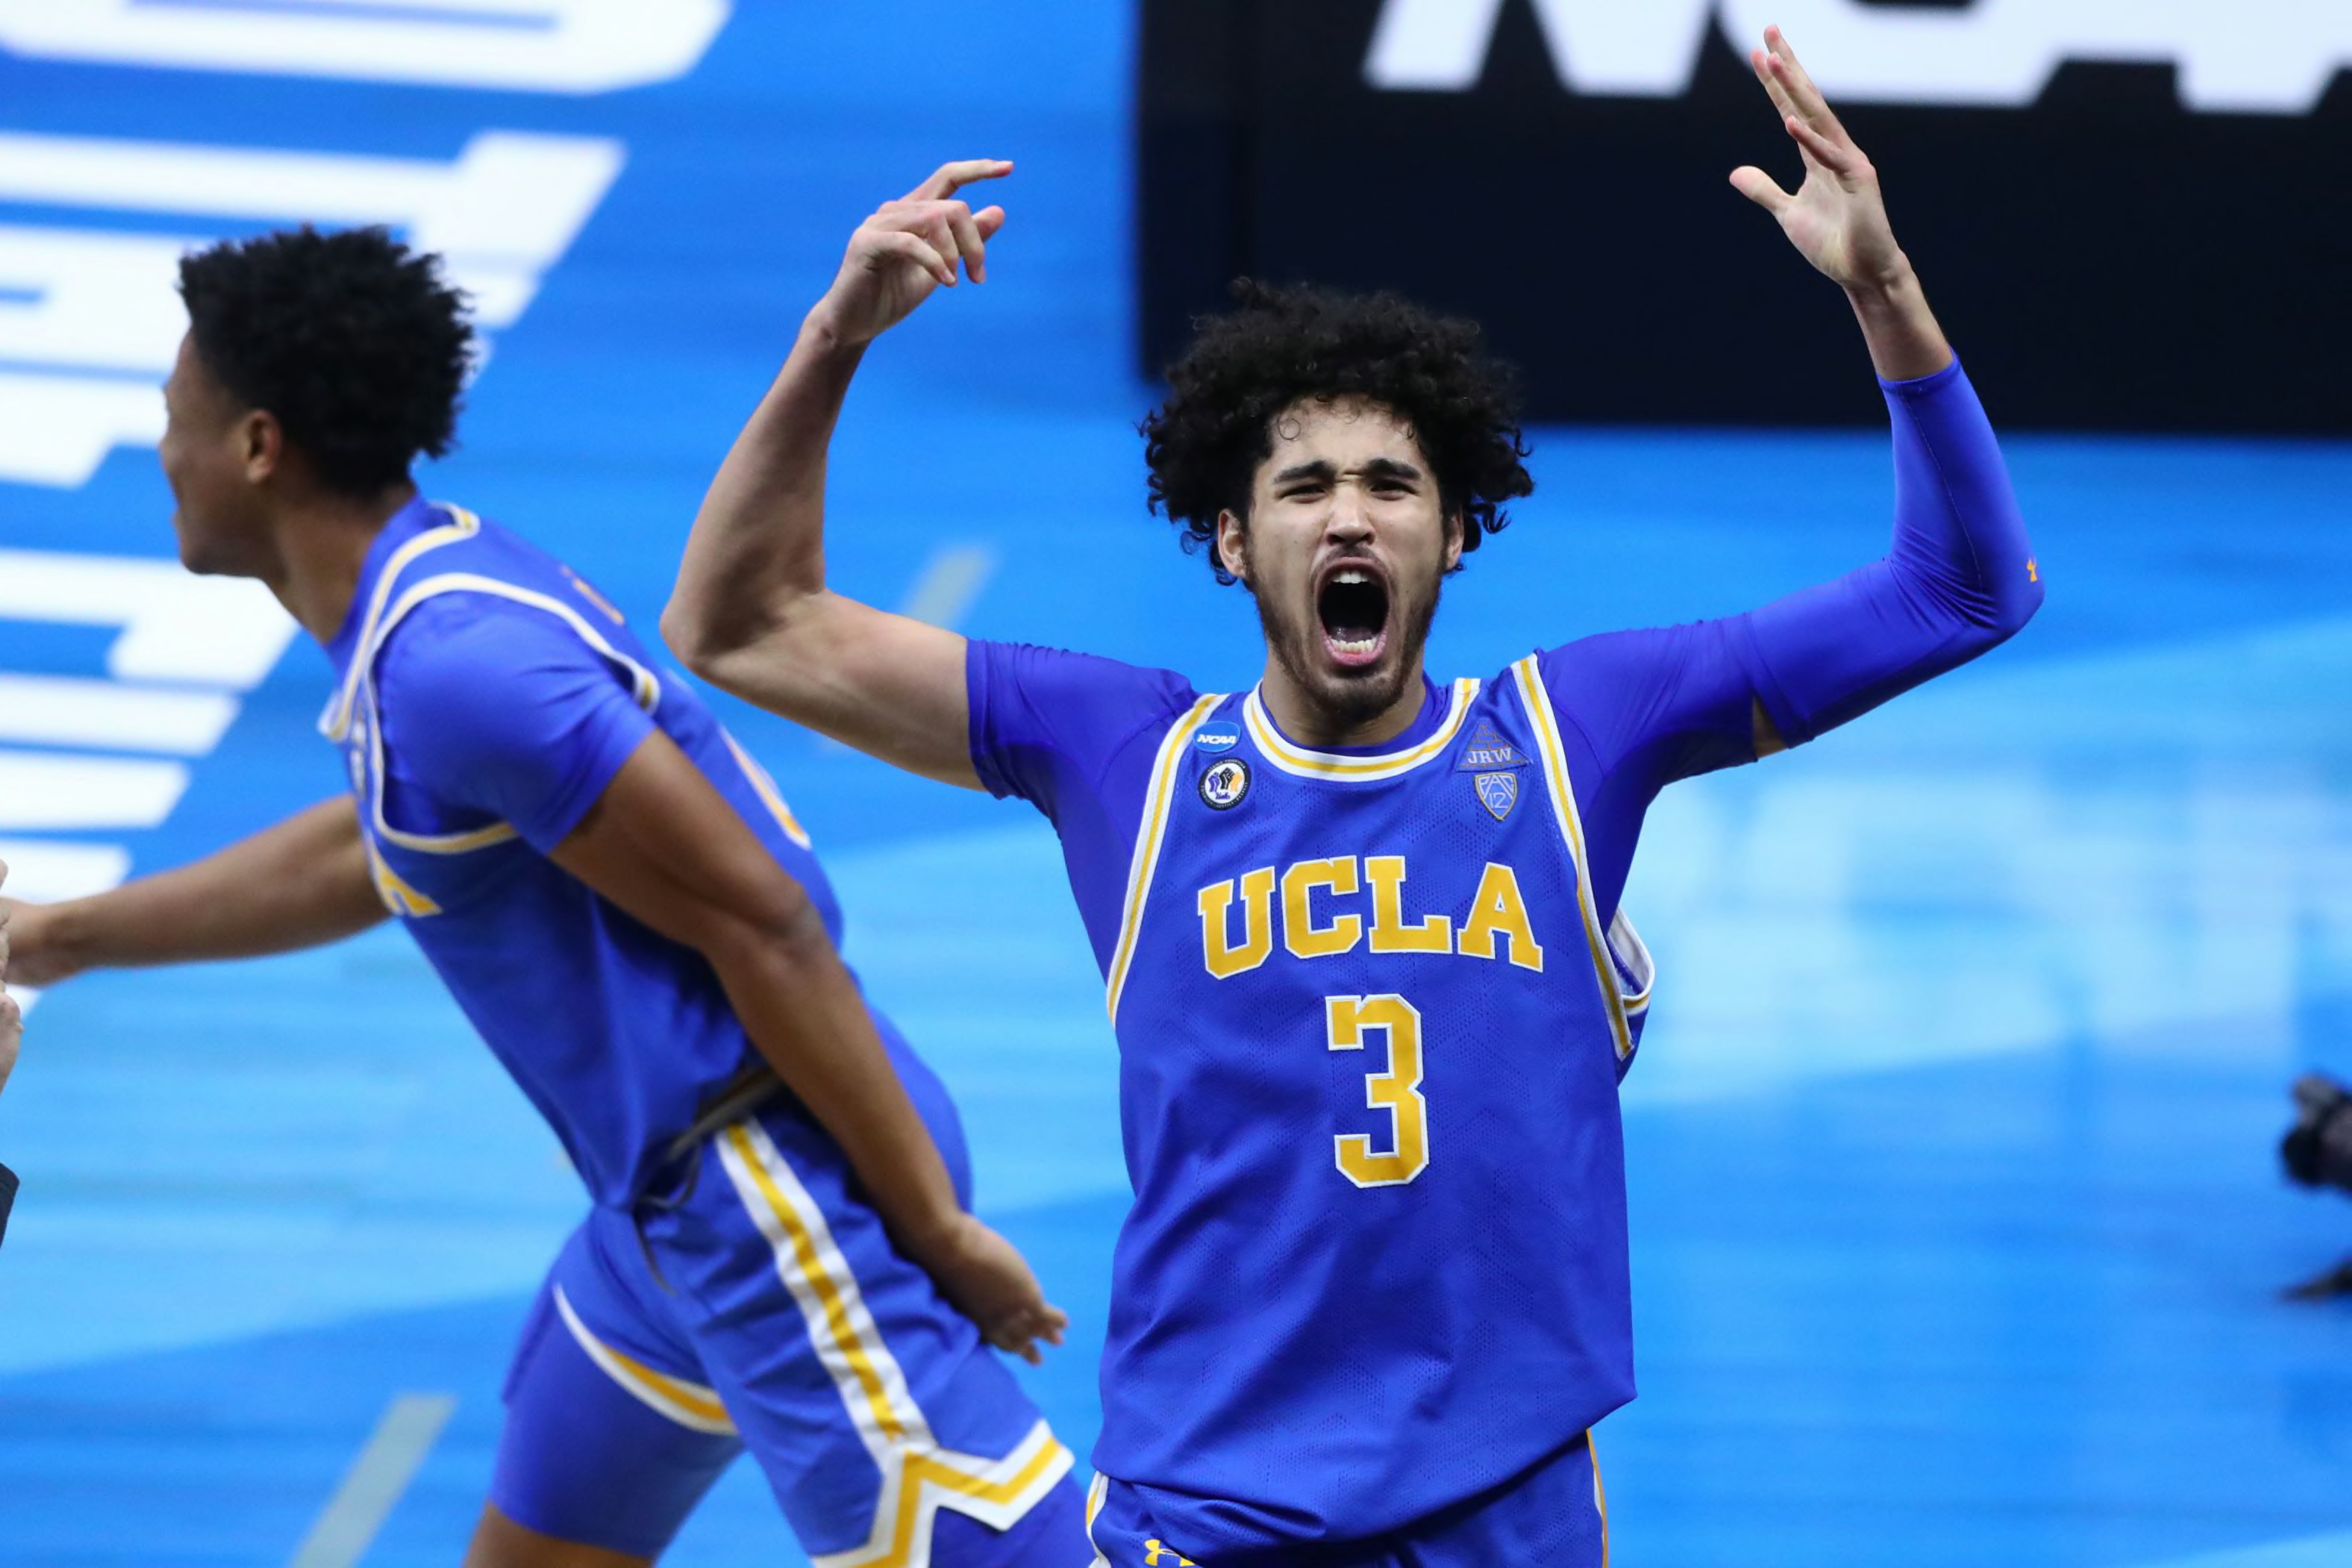 Johnny Juzang declares for the NBA Draft but may return to UCLA Bruins  basketball - A Sea Of Blue